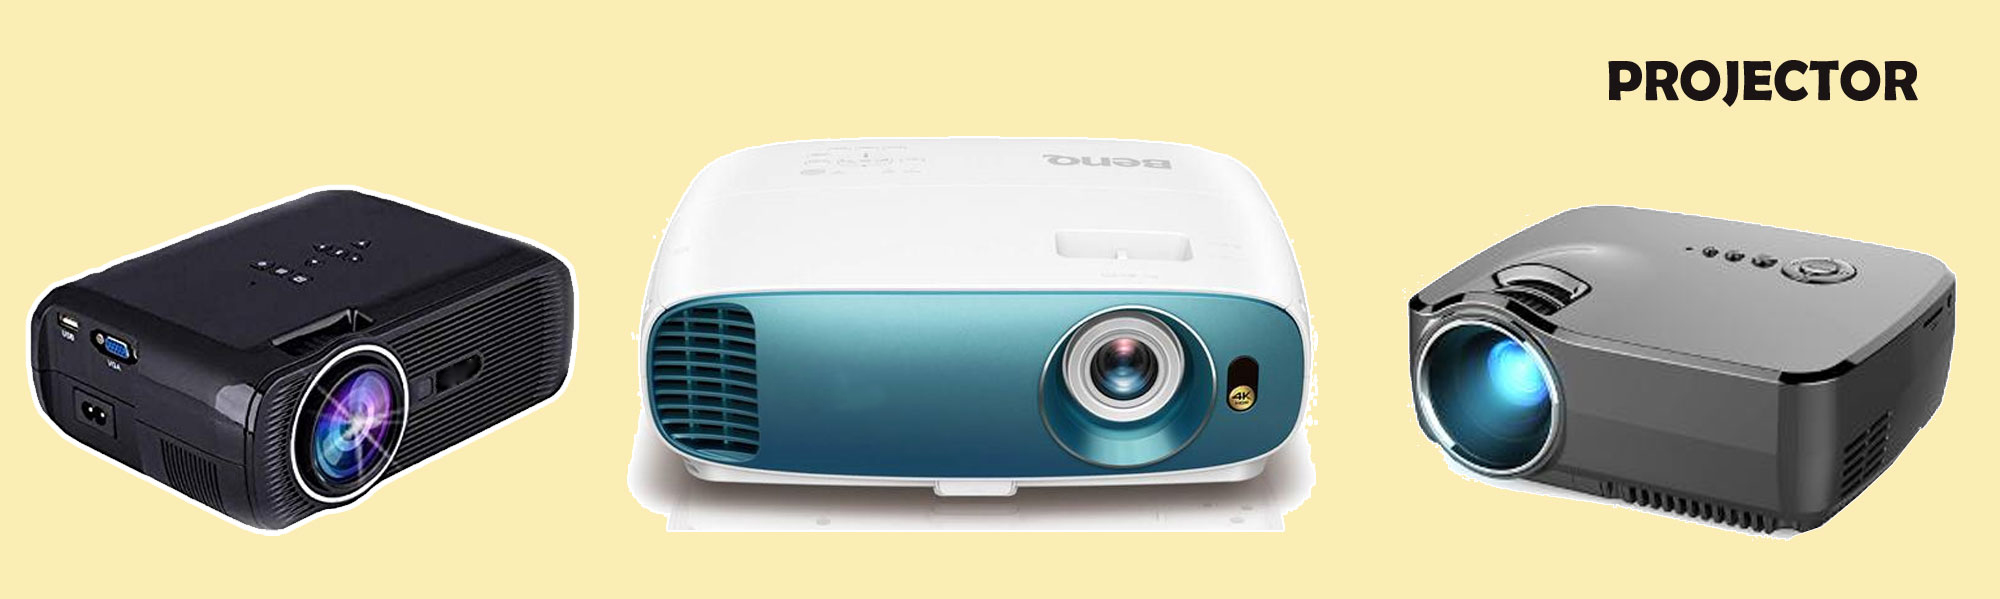 Sony Projector on Rent